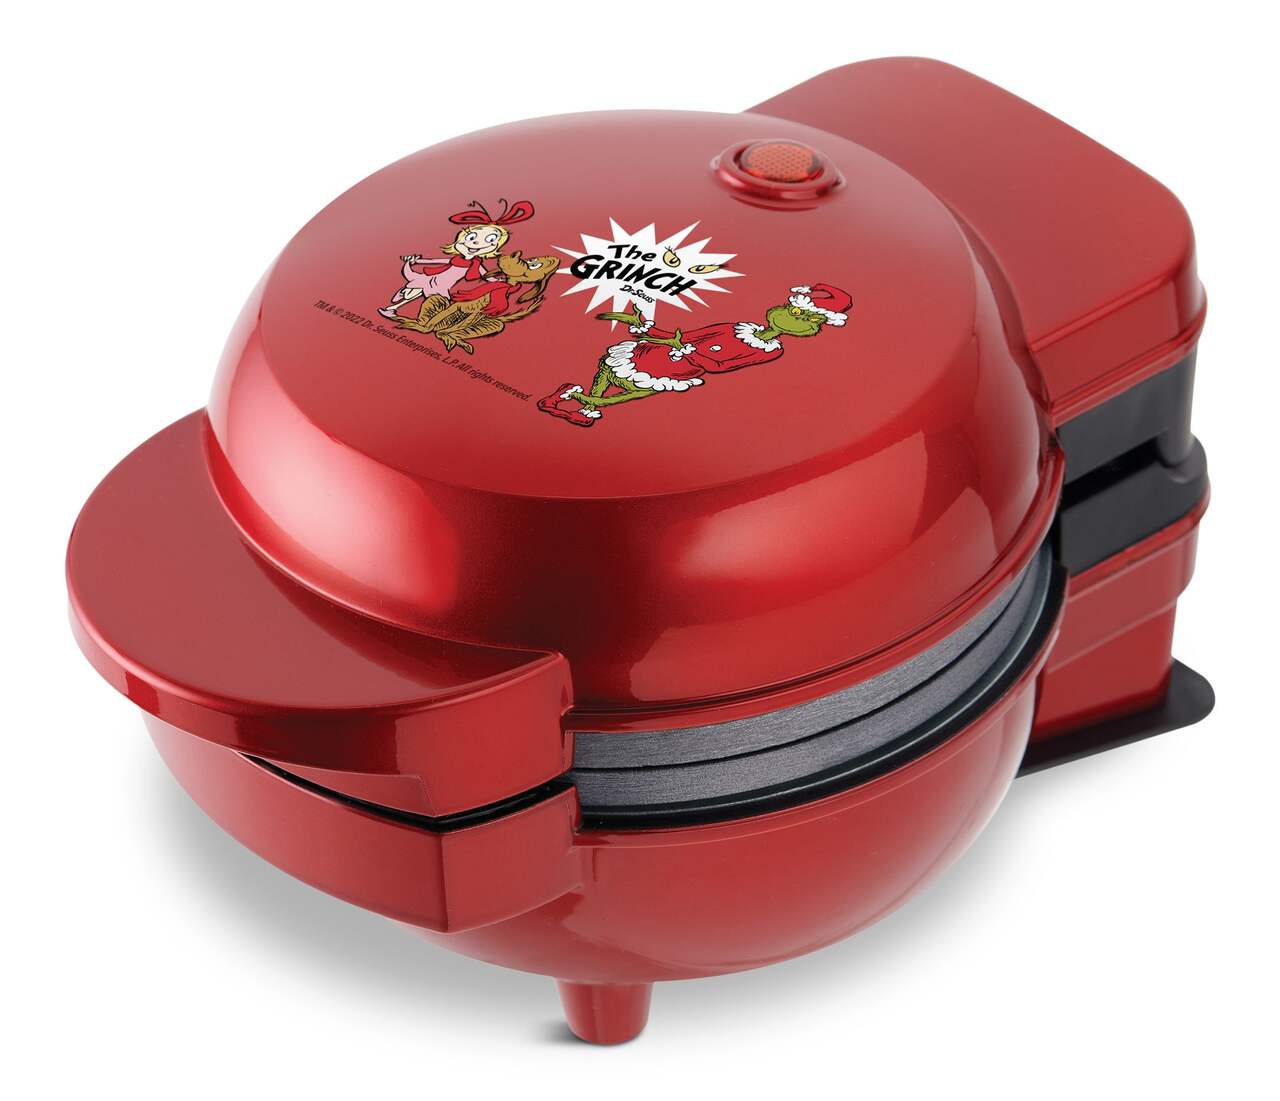 https://media-www.canadiantire.ca/product/living/kitchen/kitchen-appliances/4991124/grinch-waffle-maker-and-griddle-3f20856c-5488-41c7-98ab-7c0841a18886-jpgrendition.jpg?imdensity=1&imwidth=1244&impolicy=mZoom